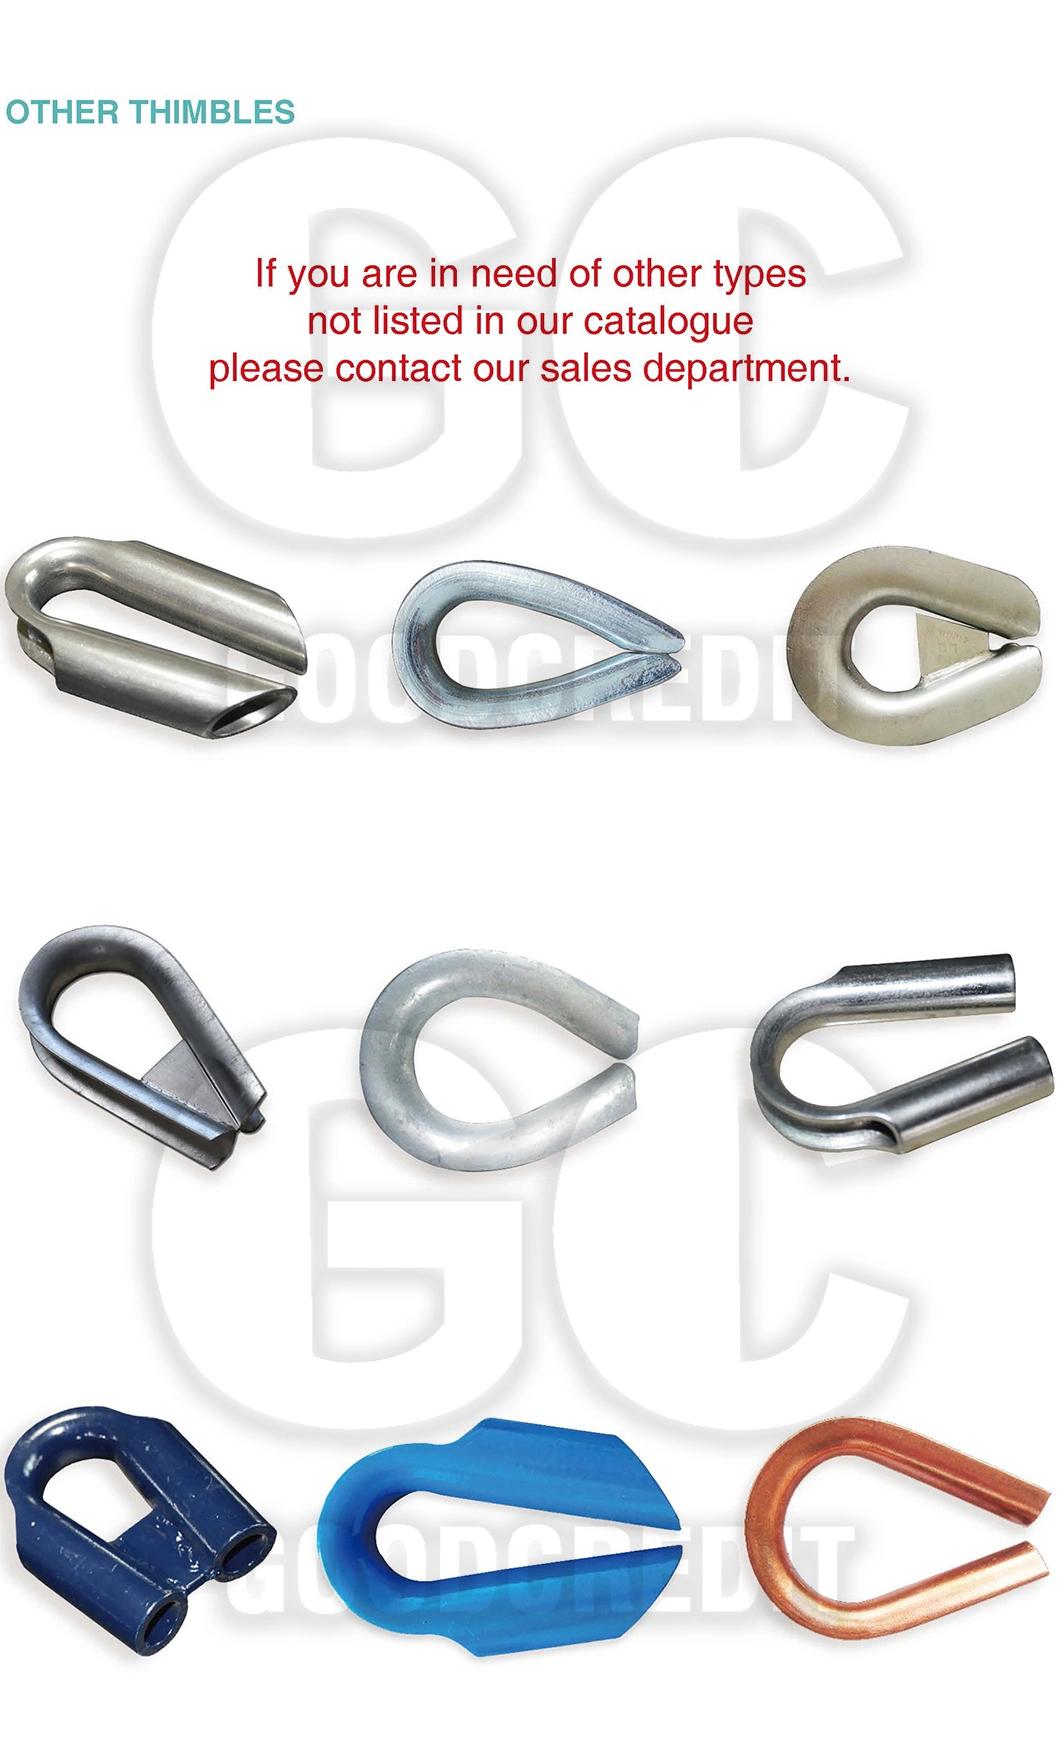 Hot Sale Steel or Stainless Steel U. S Type Regular Duty Thimble for Riggings